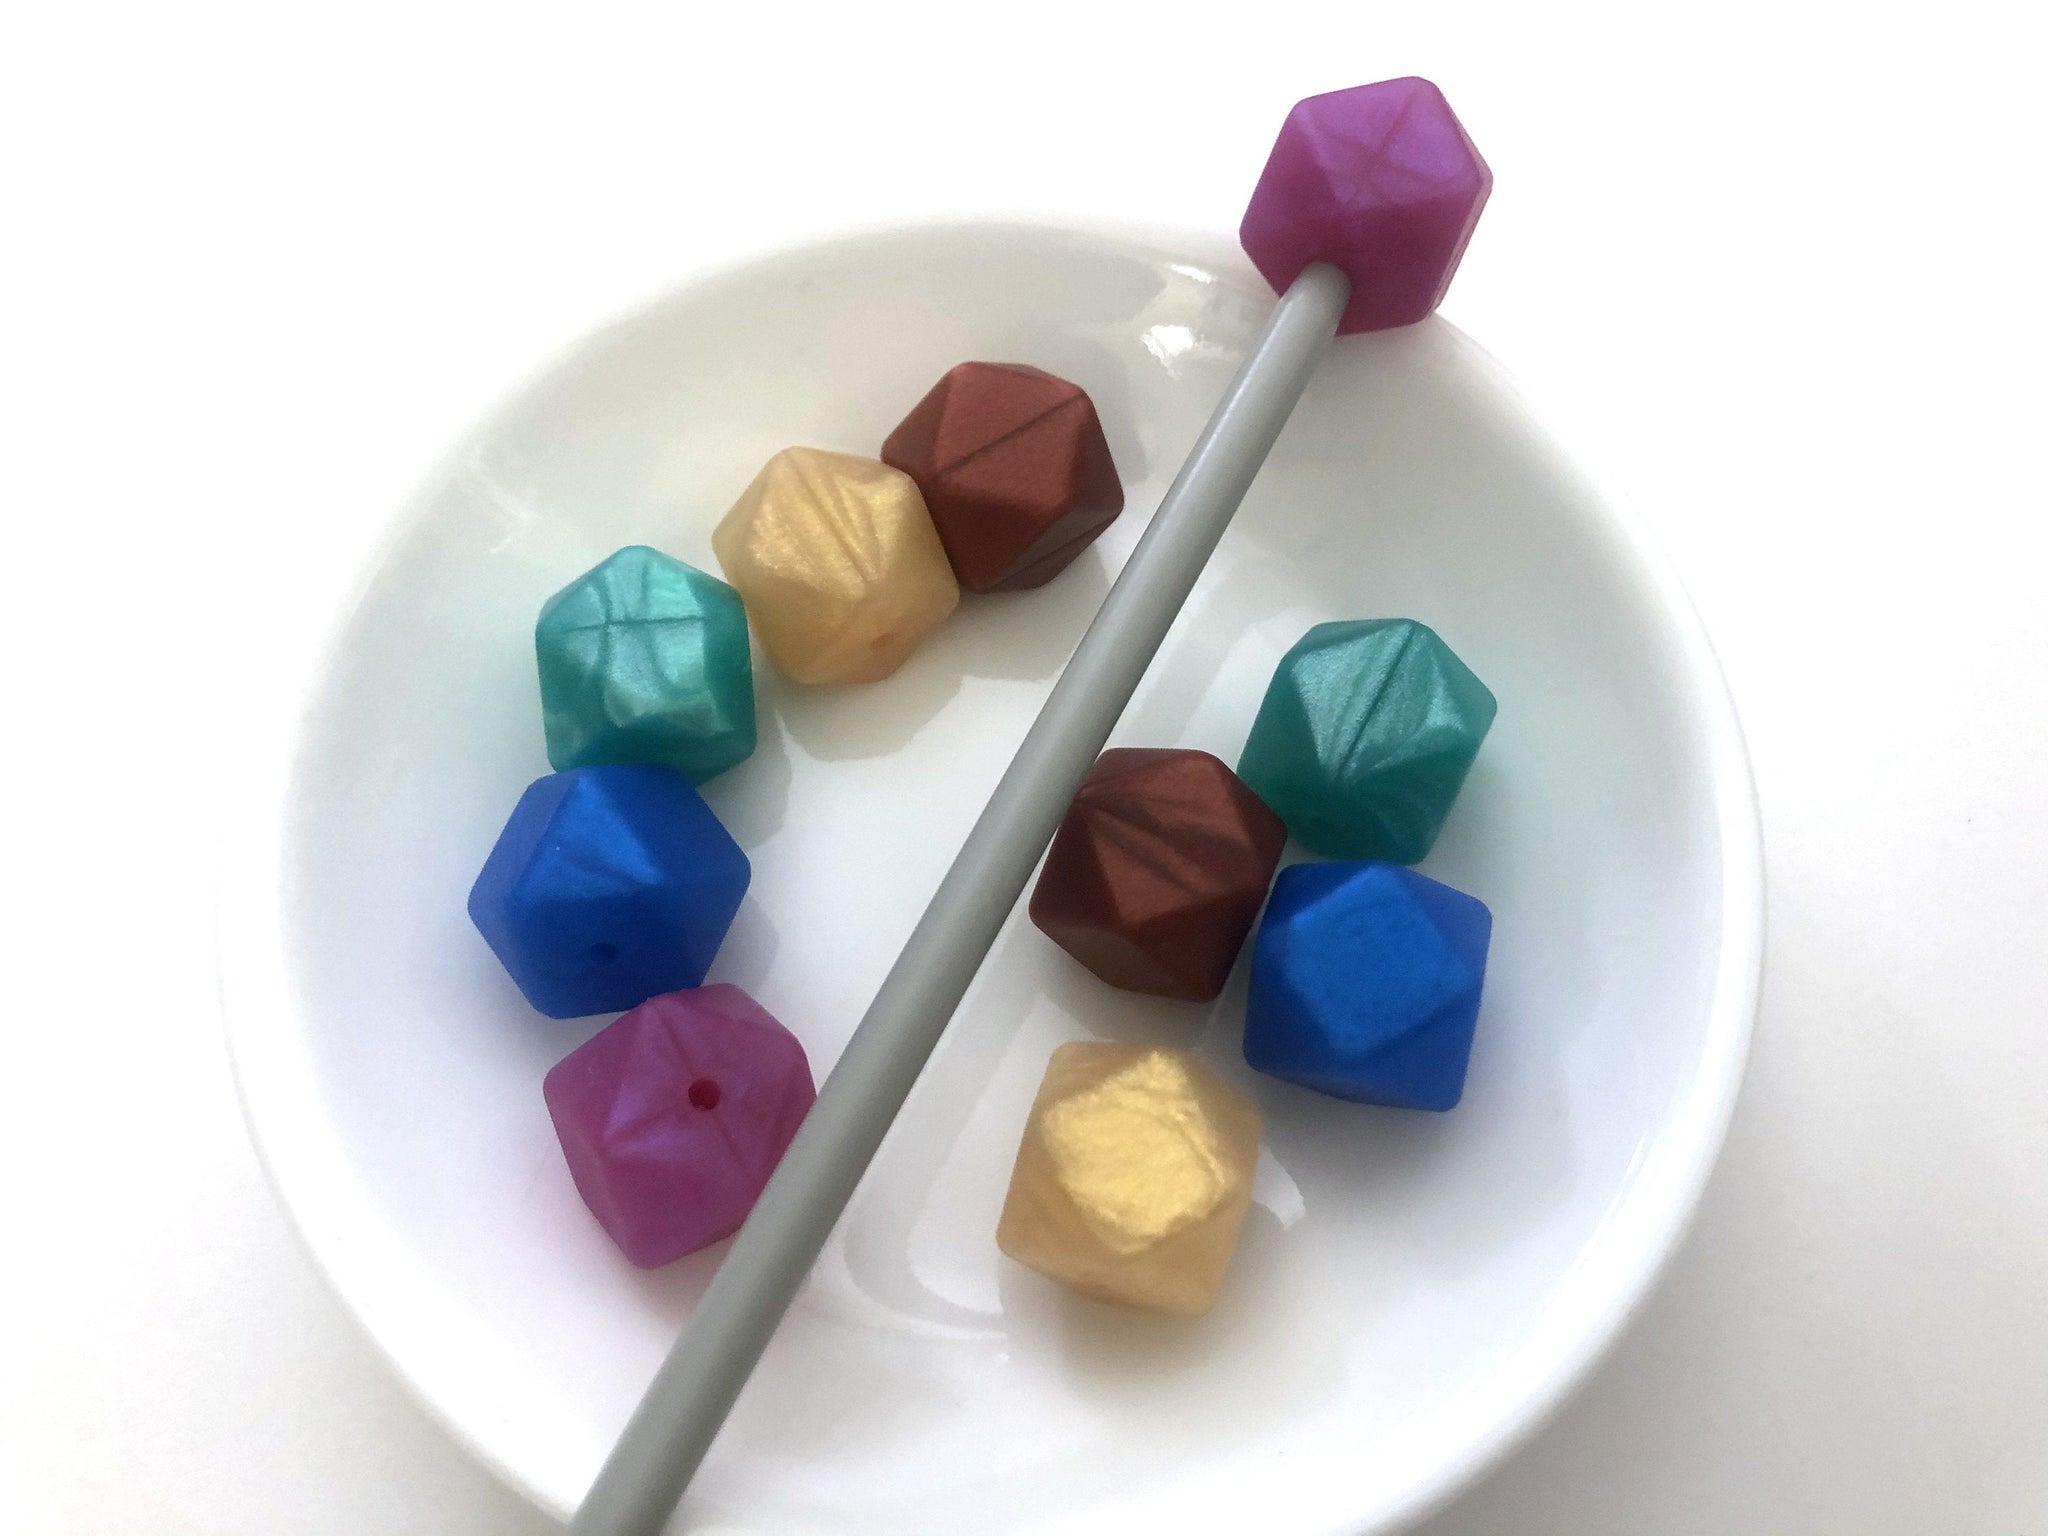 Knitting Needle Stoppers - Jewels - Beader Caps - Beader Tips - Back Stoppers - Point Protectors - End Stoppers - Stitch Holder